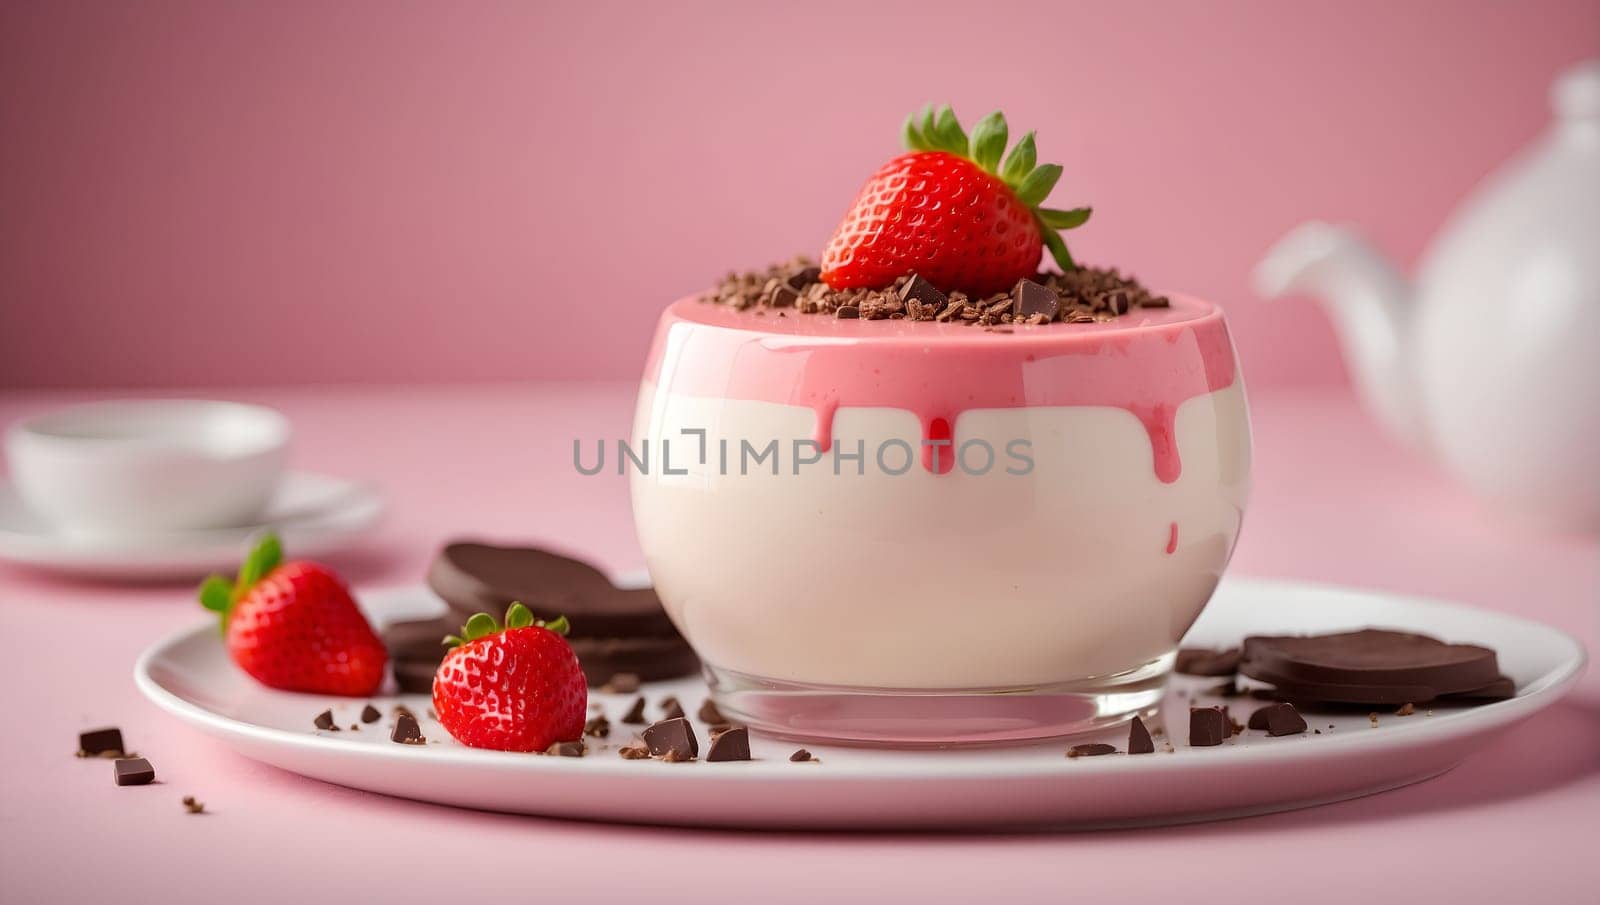 panna cotta with strawberries and strawberry sauce on a pastel pink background by Севостьянов